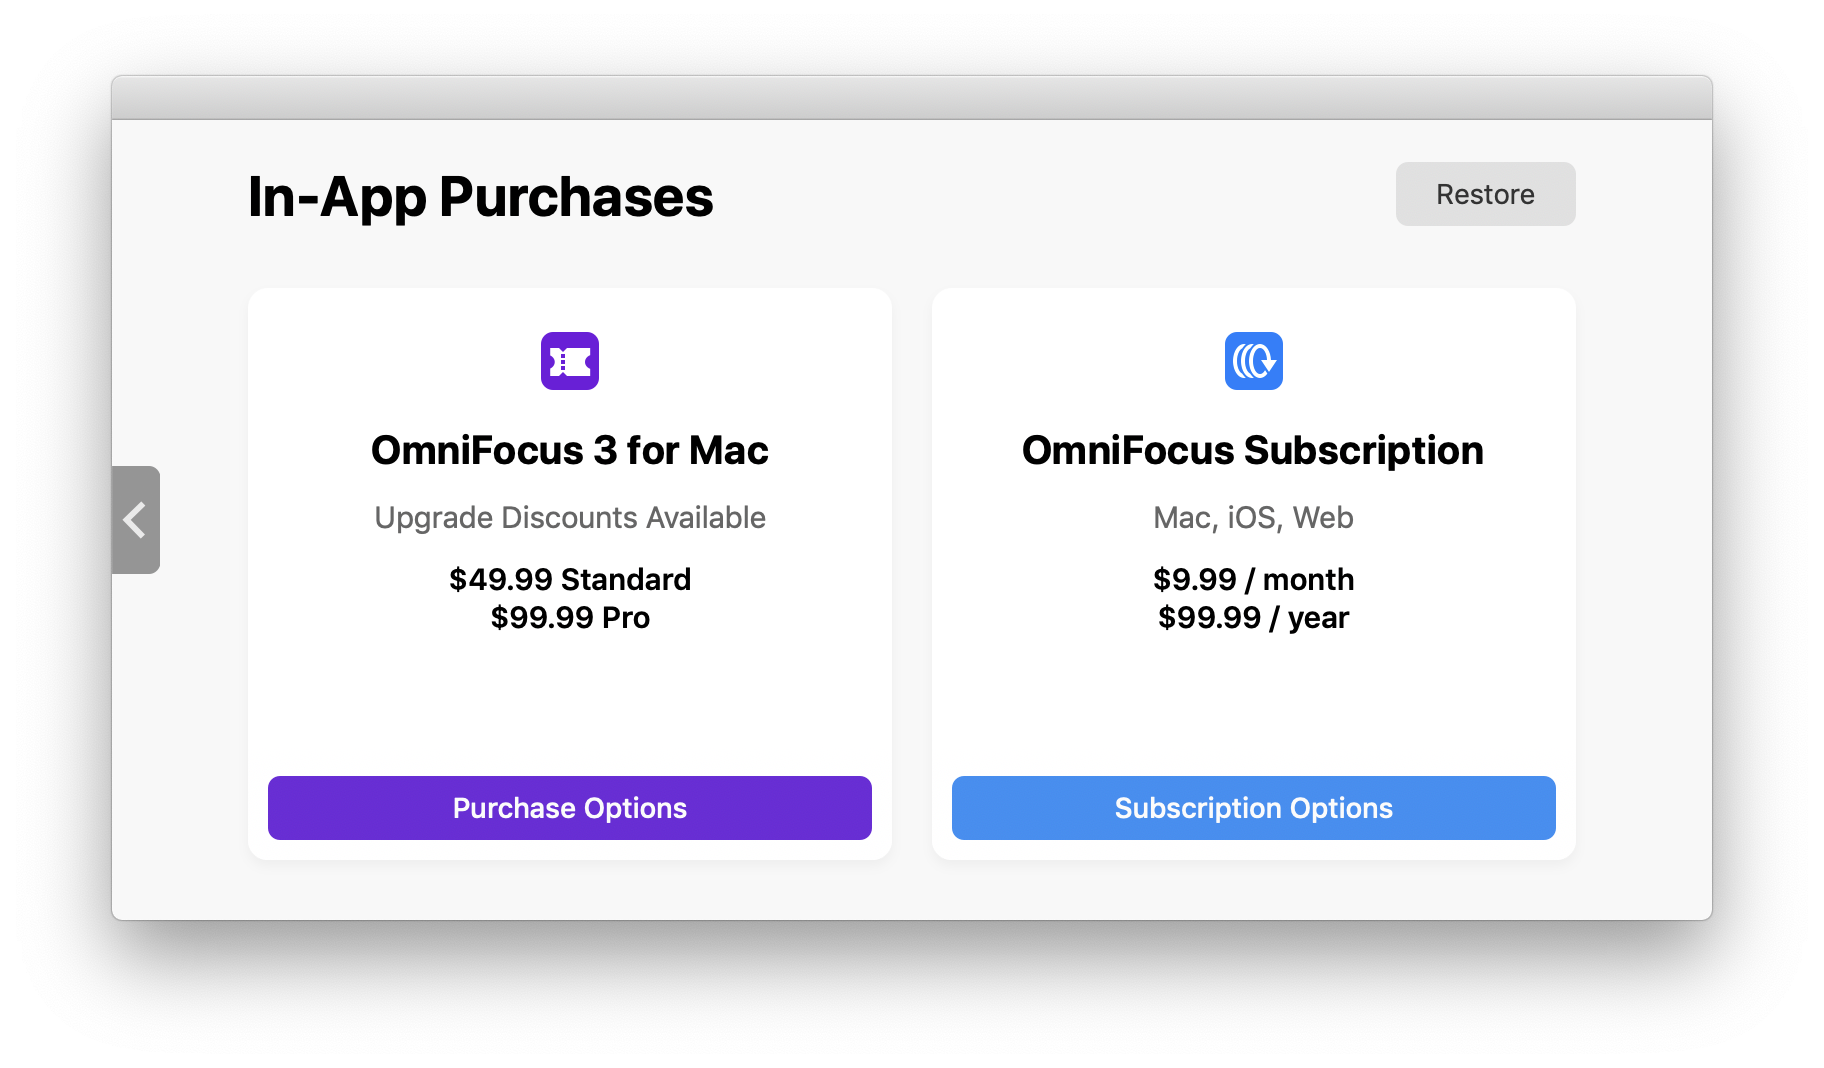 Click "View Subscription Options" in OmniFocus 3 for Mac.